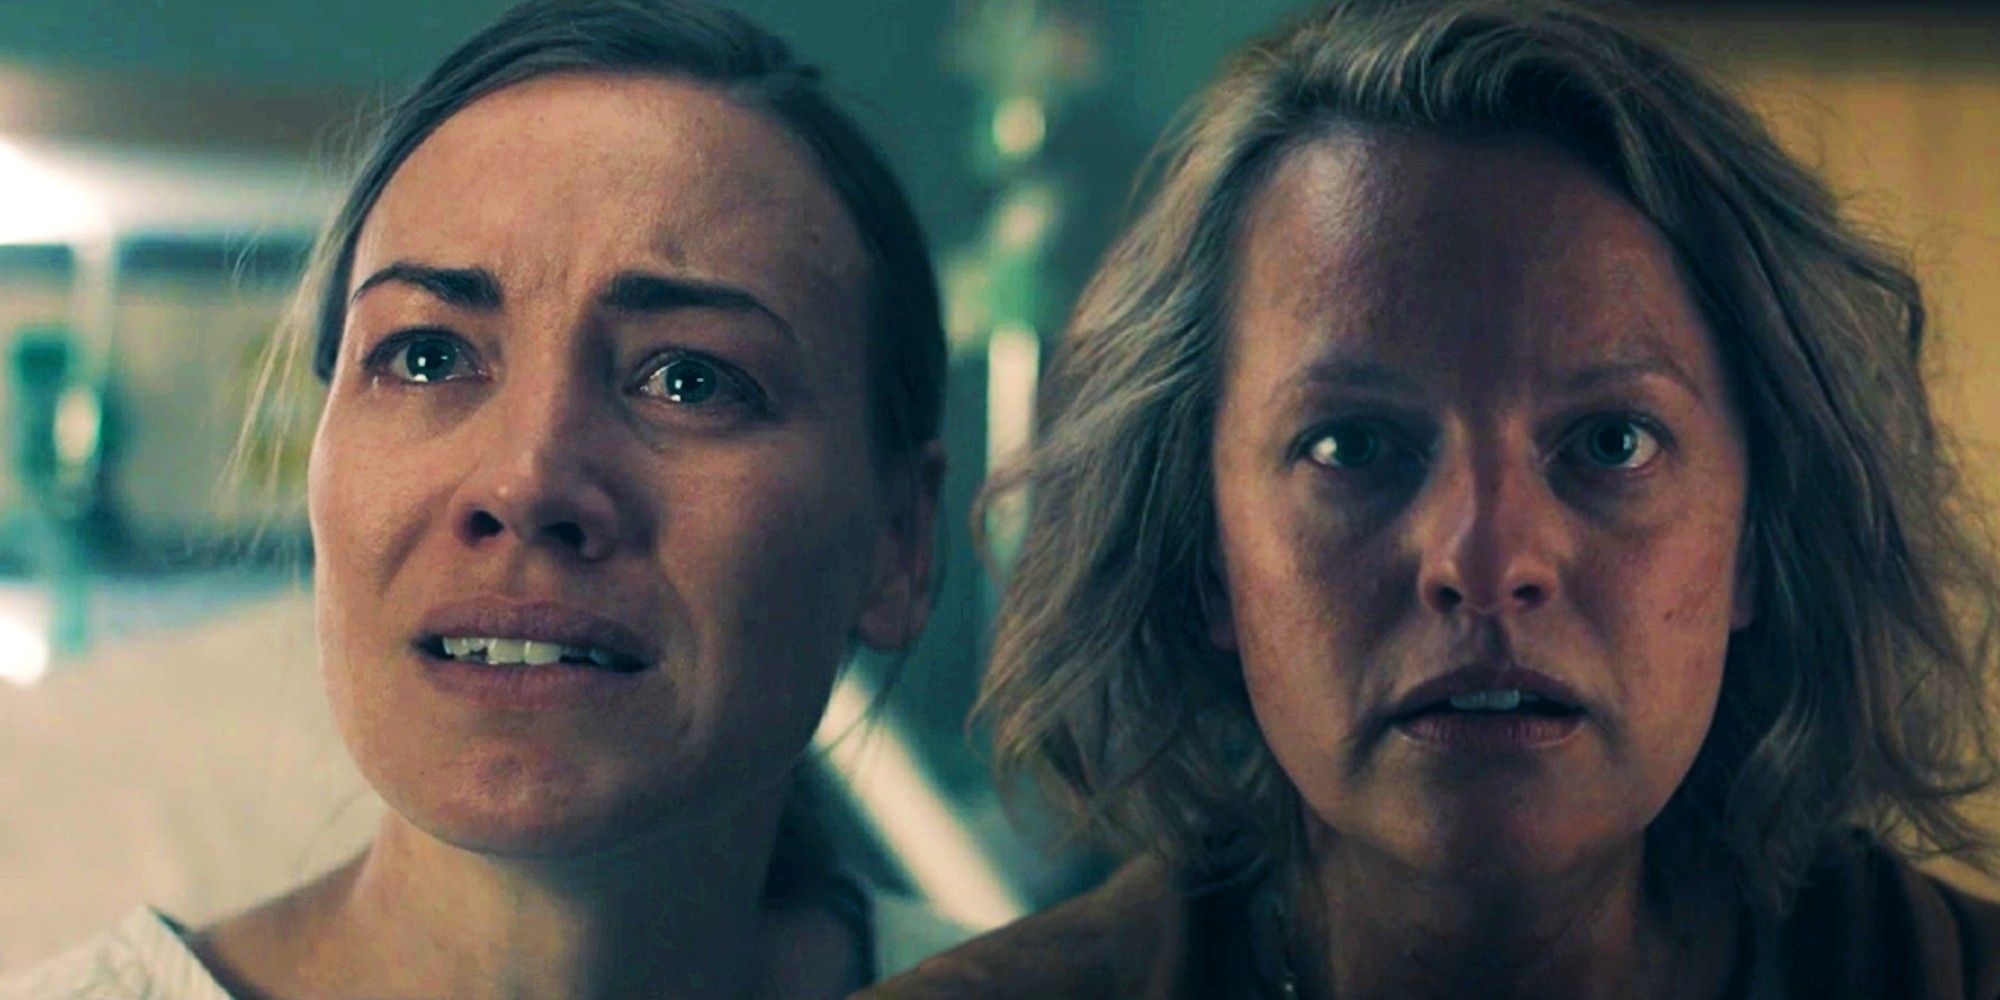 June and Serena in The Handmaids Tale Season 5 Episode 7